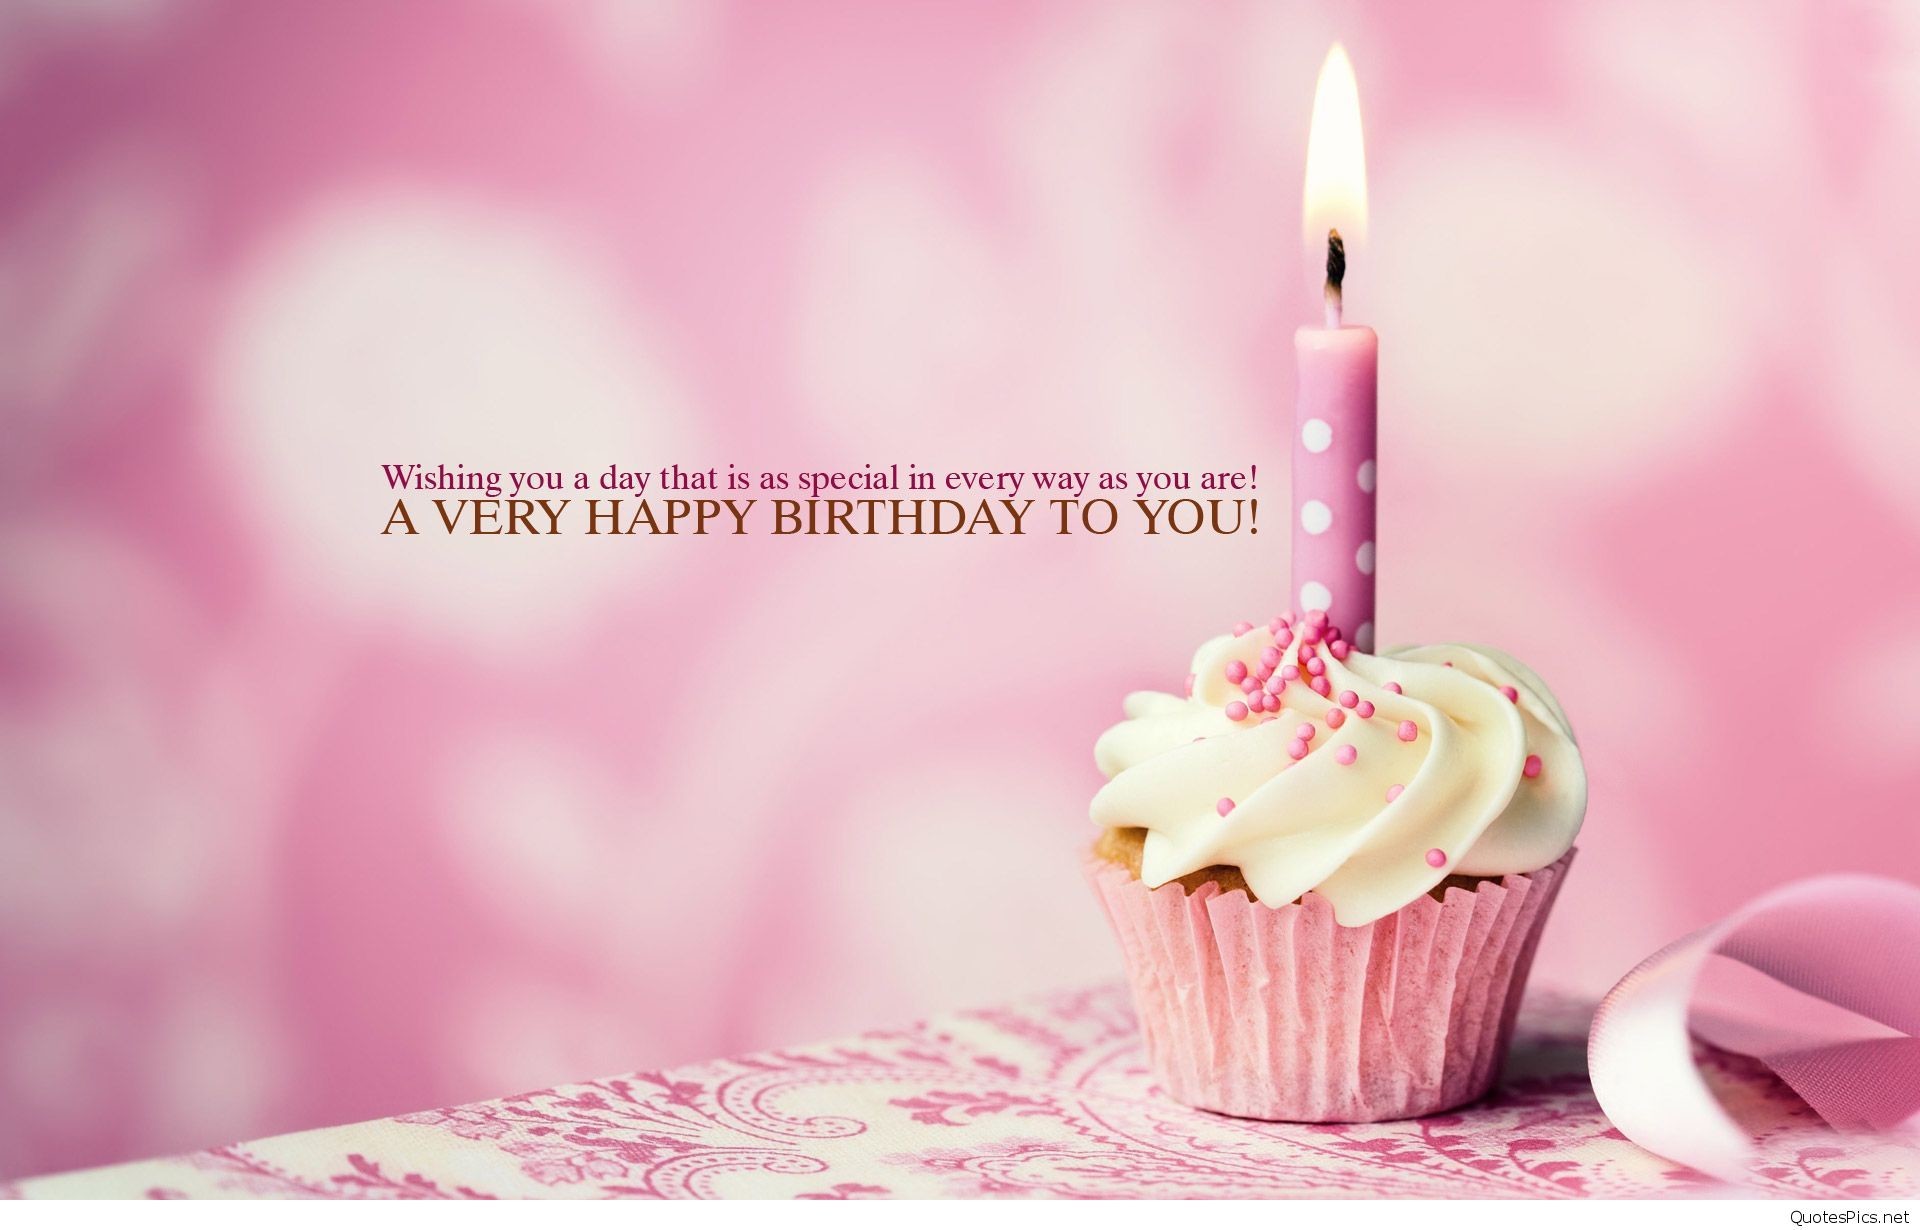 1920x1080, Happy Birthday Cake Wallpaper - Happy Birthday You Deserve All The Best , HD Wallpaper & Backgrounds